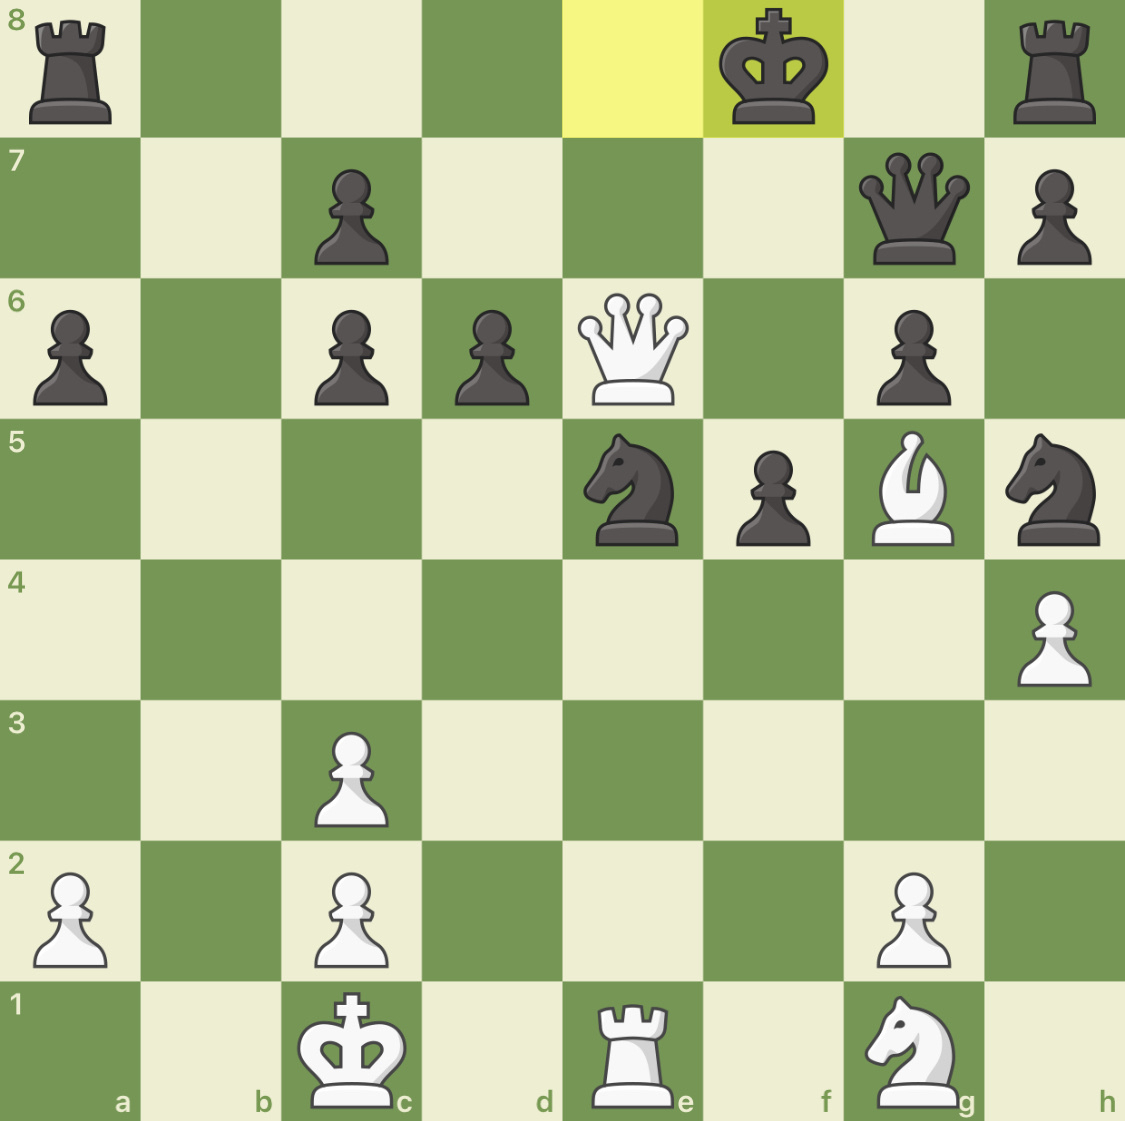 A screenshot of a chess game I’m playing against a friend. I’m white and feel like I can get checkmate from here. Just need to think…